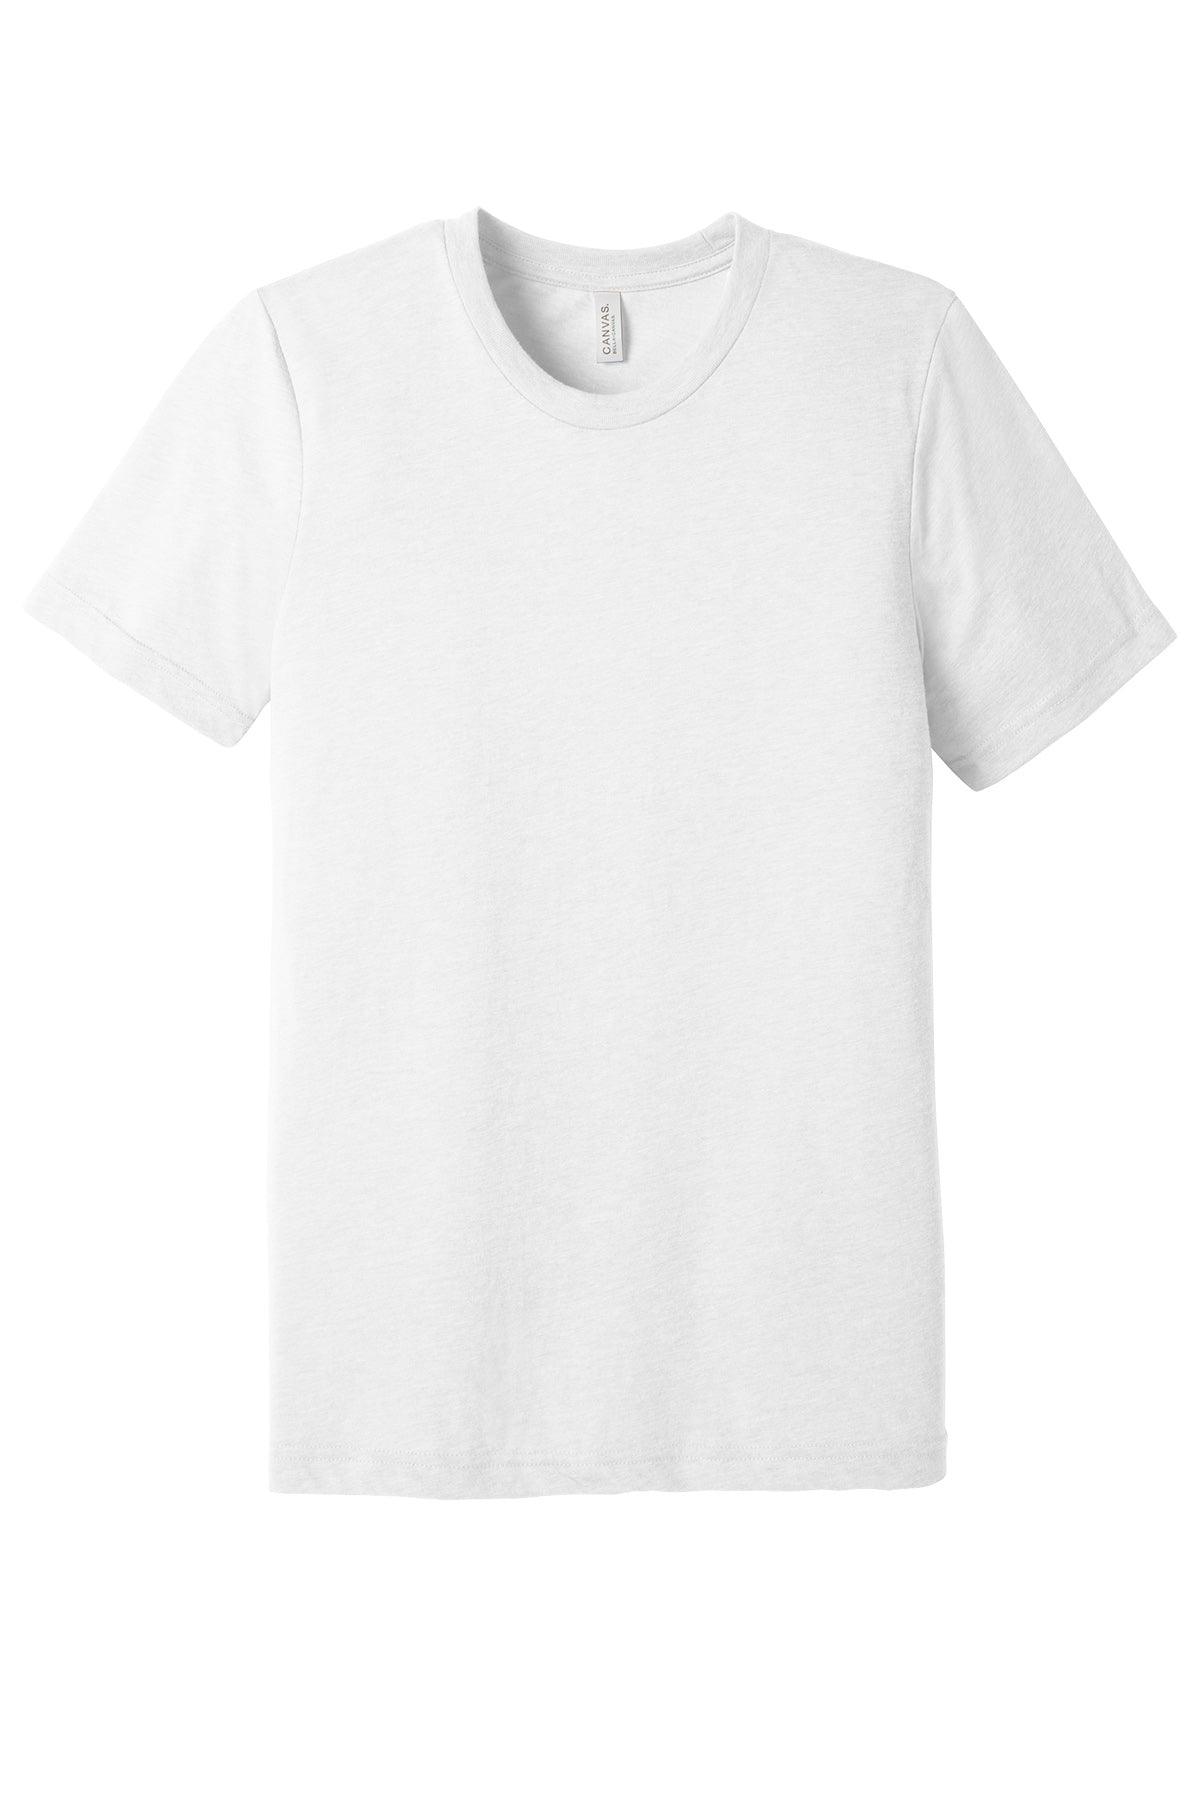 Bella+Canvas Bc3413 Adult T-Shirt Ad Small / Solid White Triblend